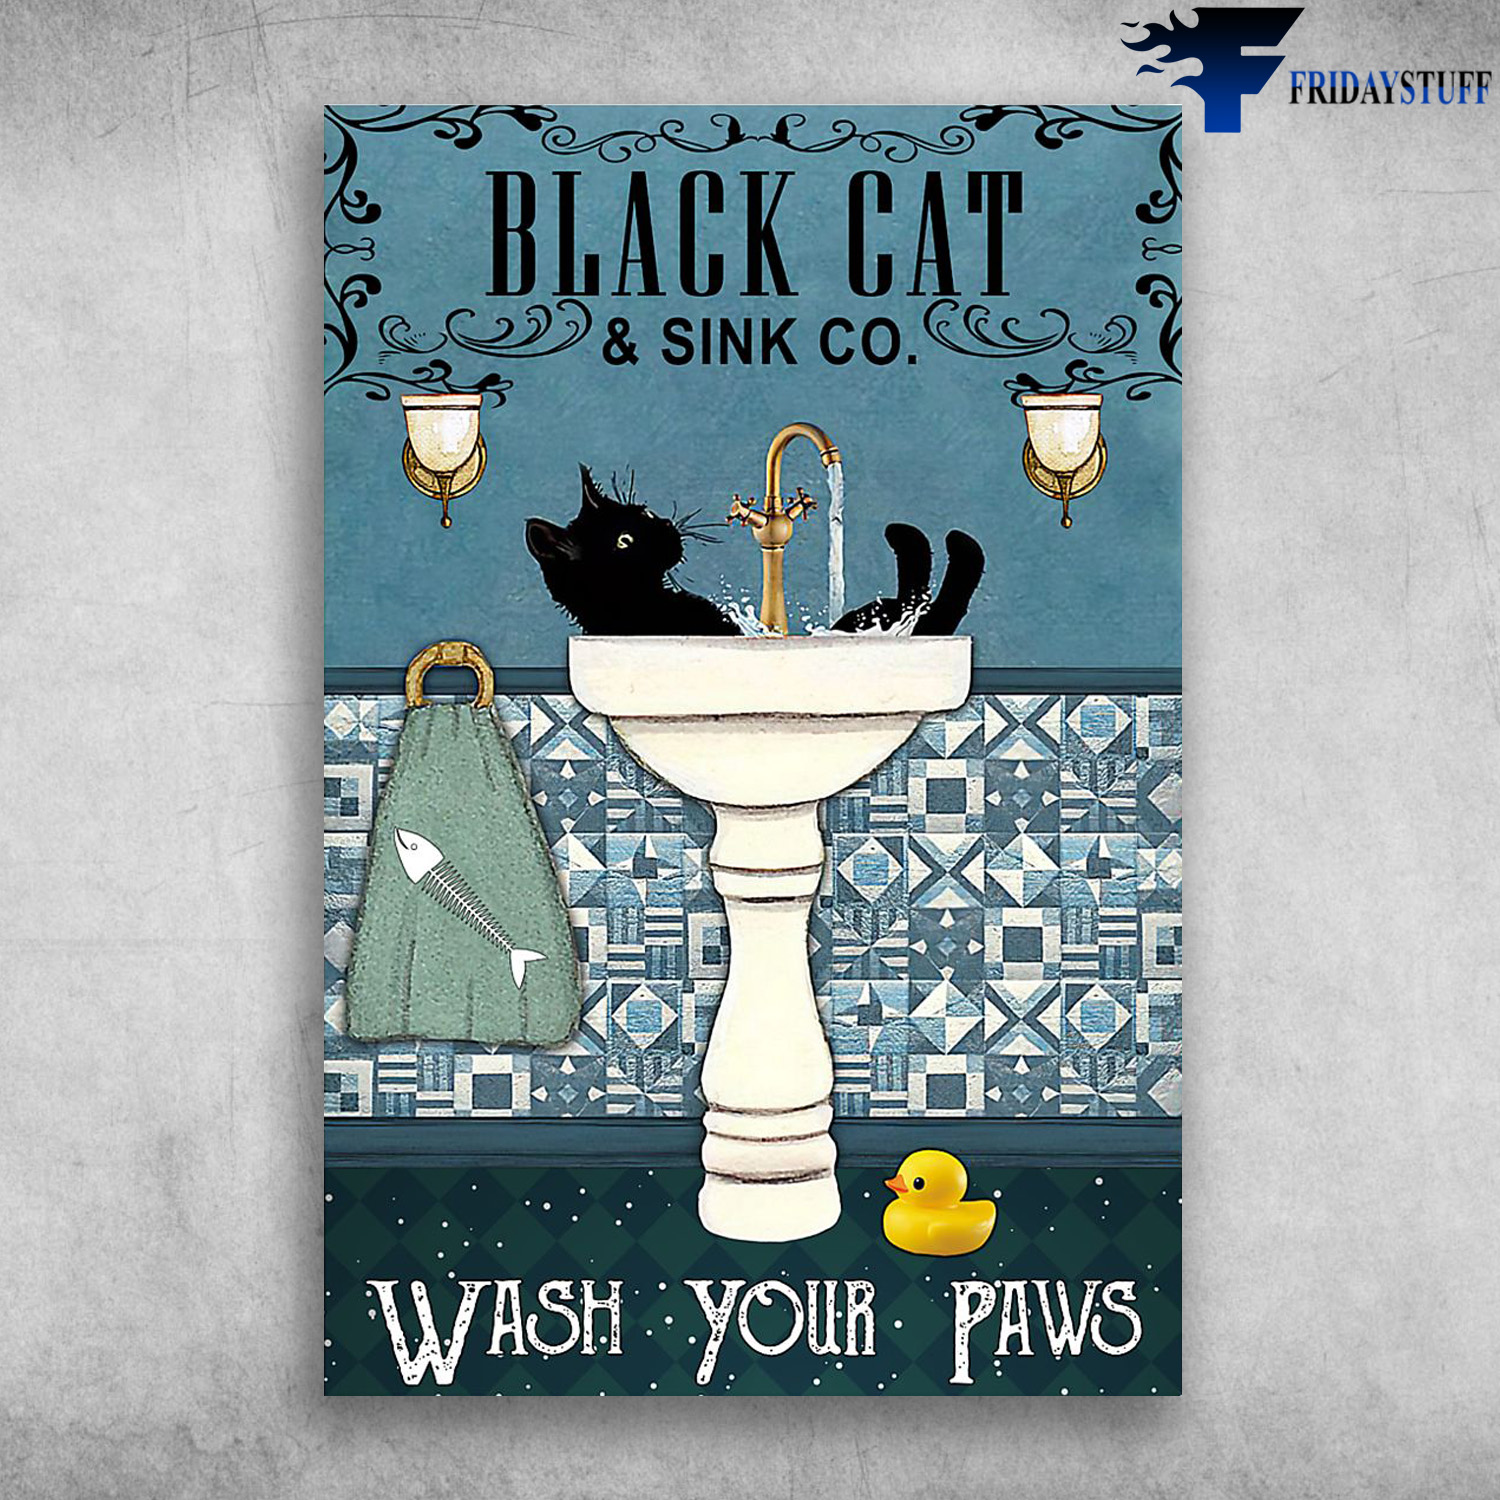 Black Cat In Bathroom - Black Cat And Sink Co., Wash Your Paws